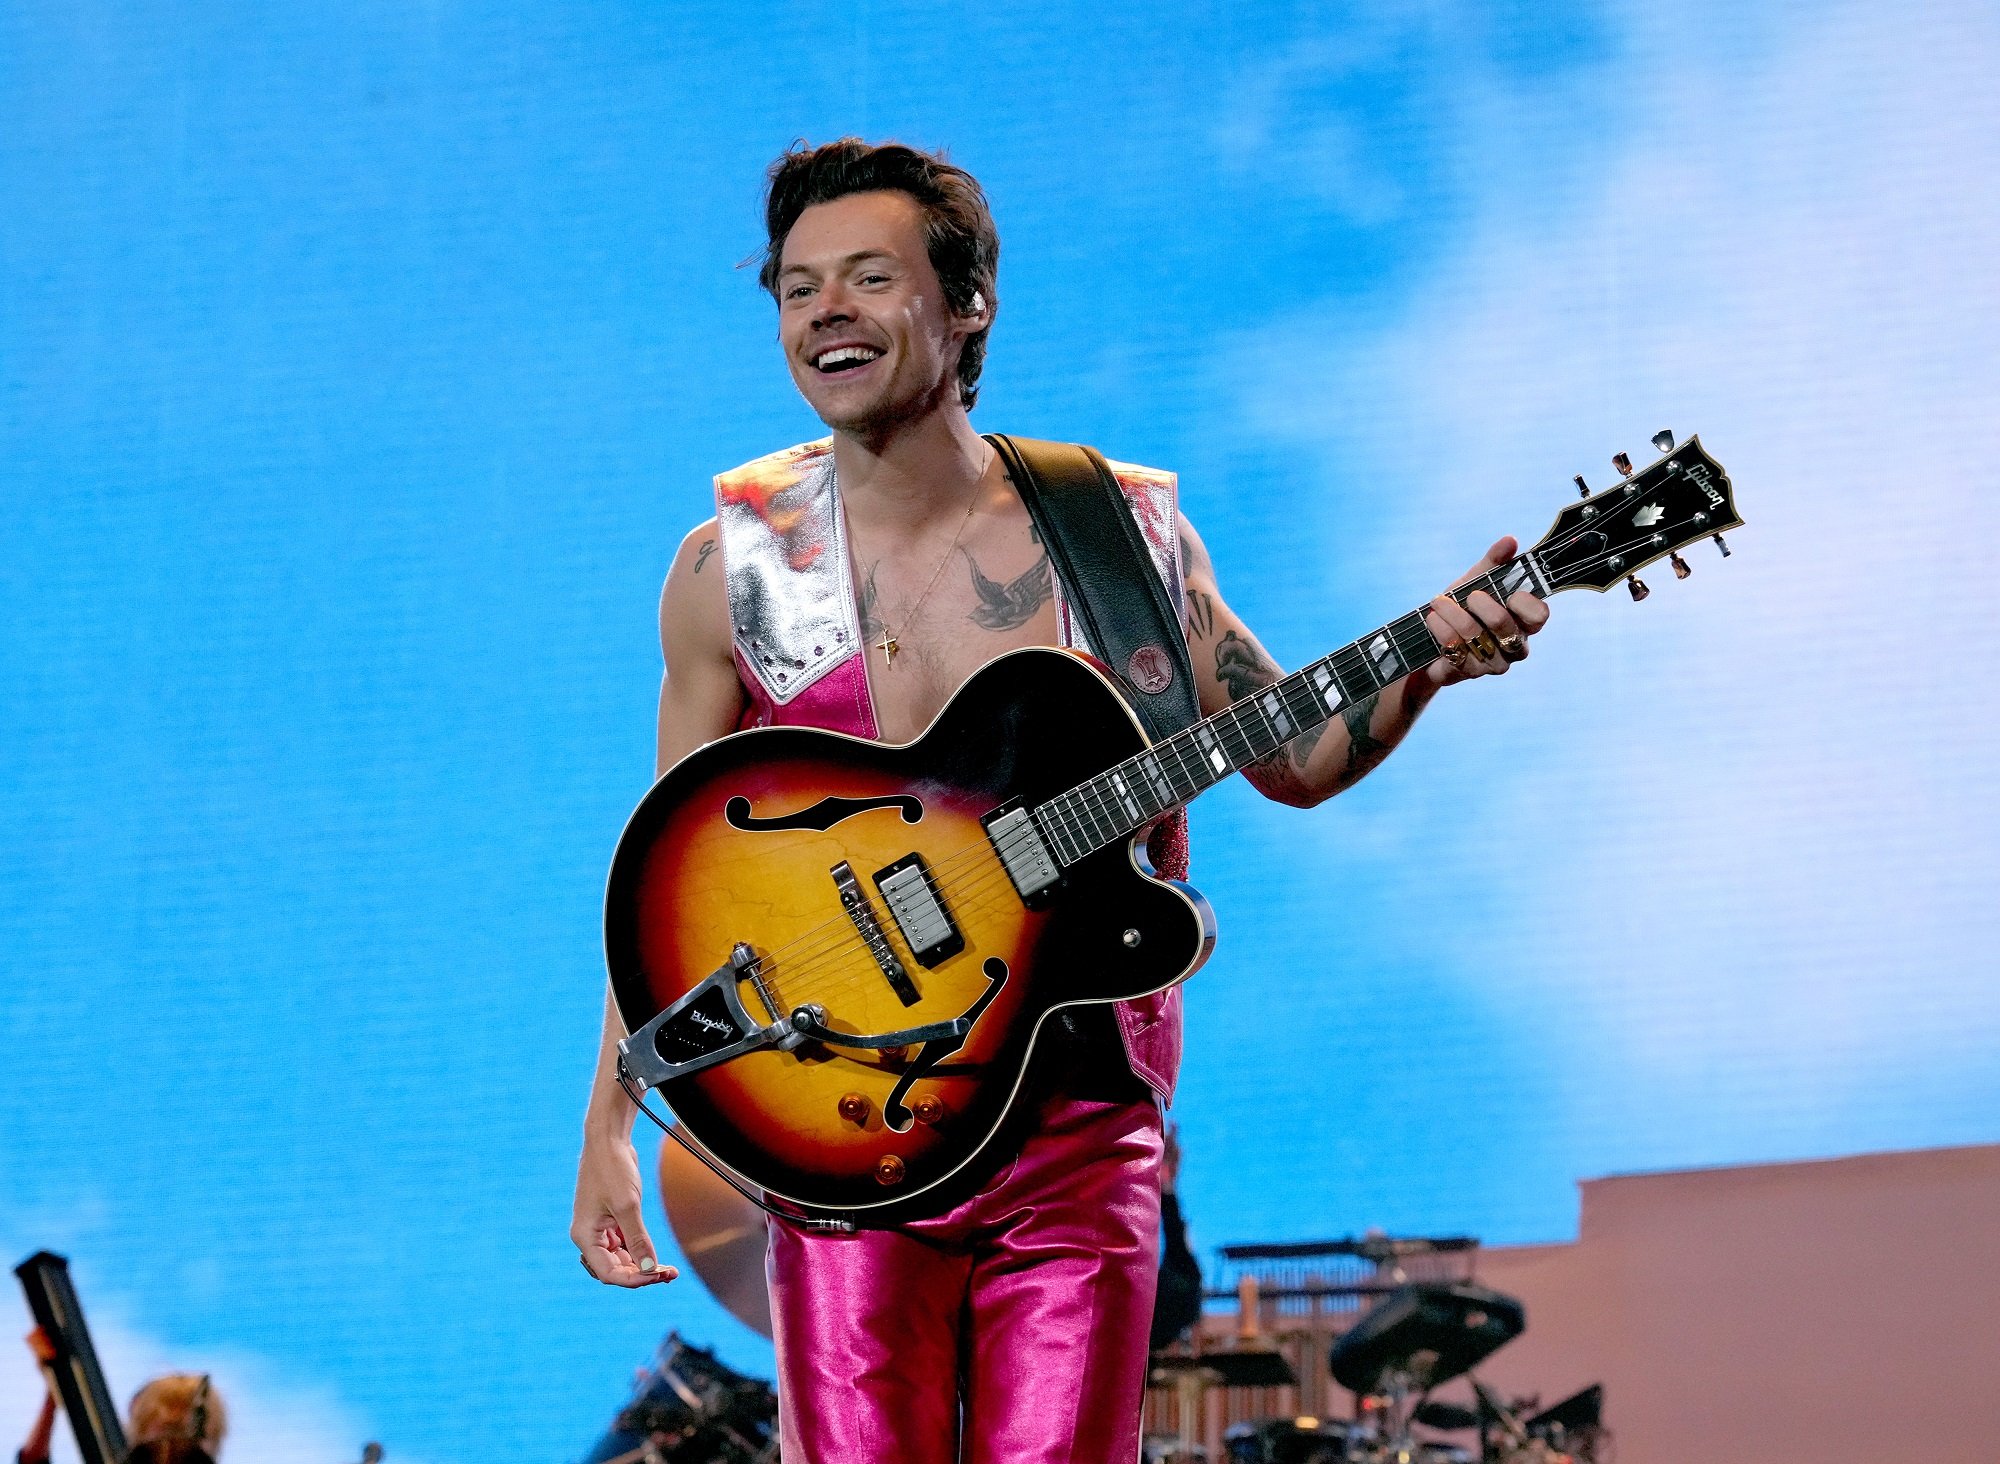 Harry Styles smiles on stage while holding a guitar